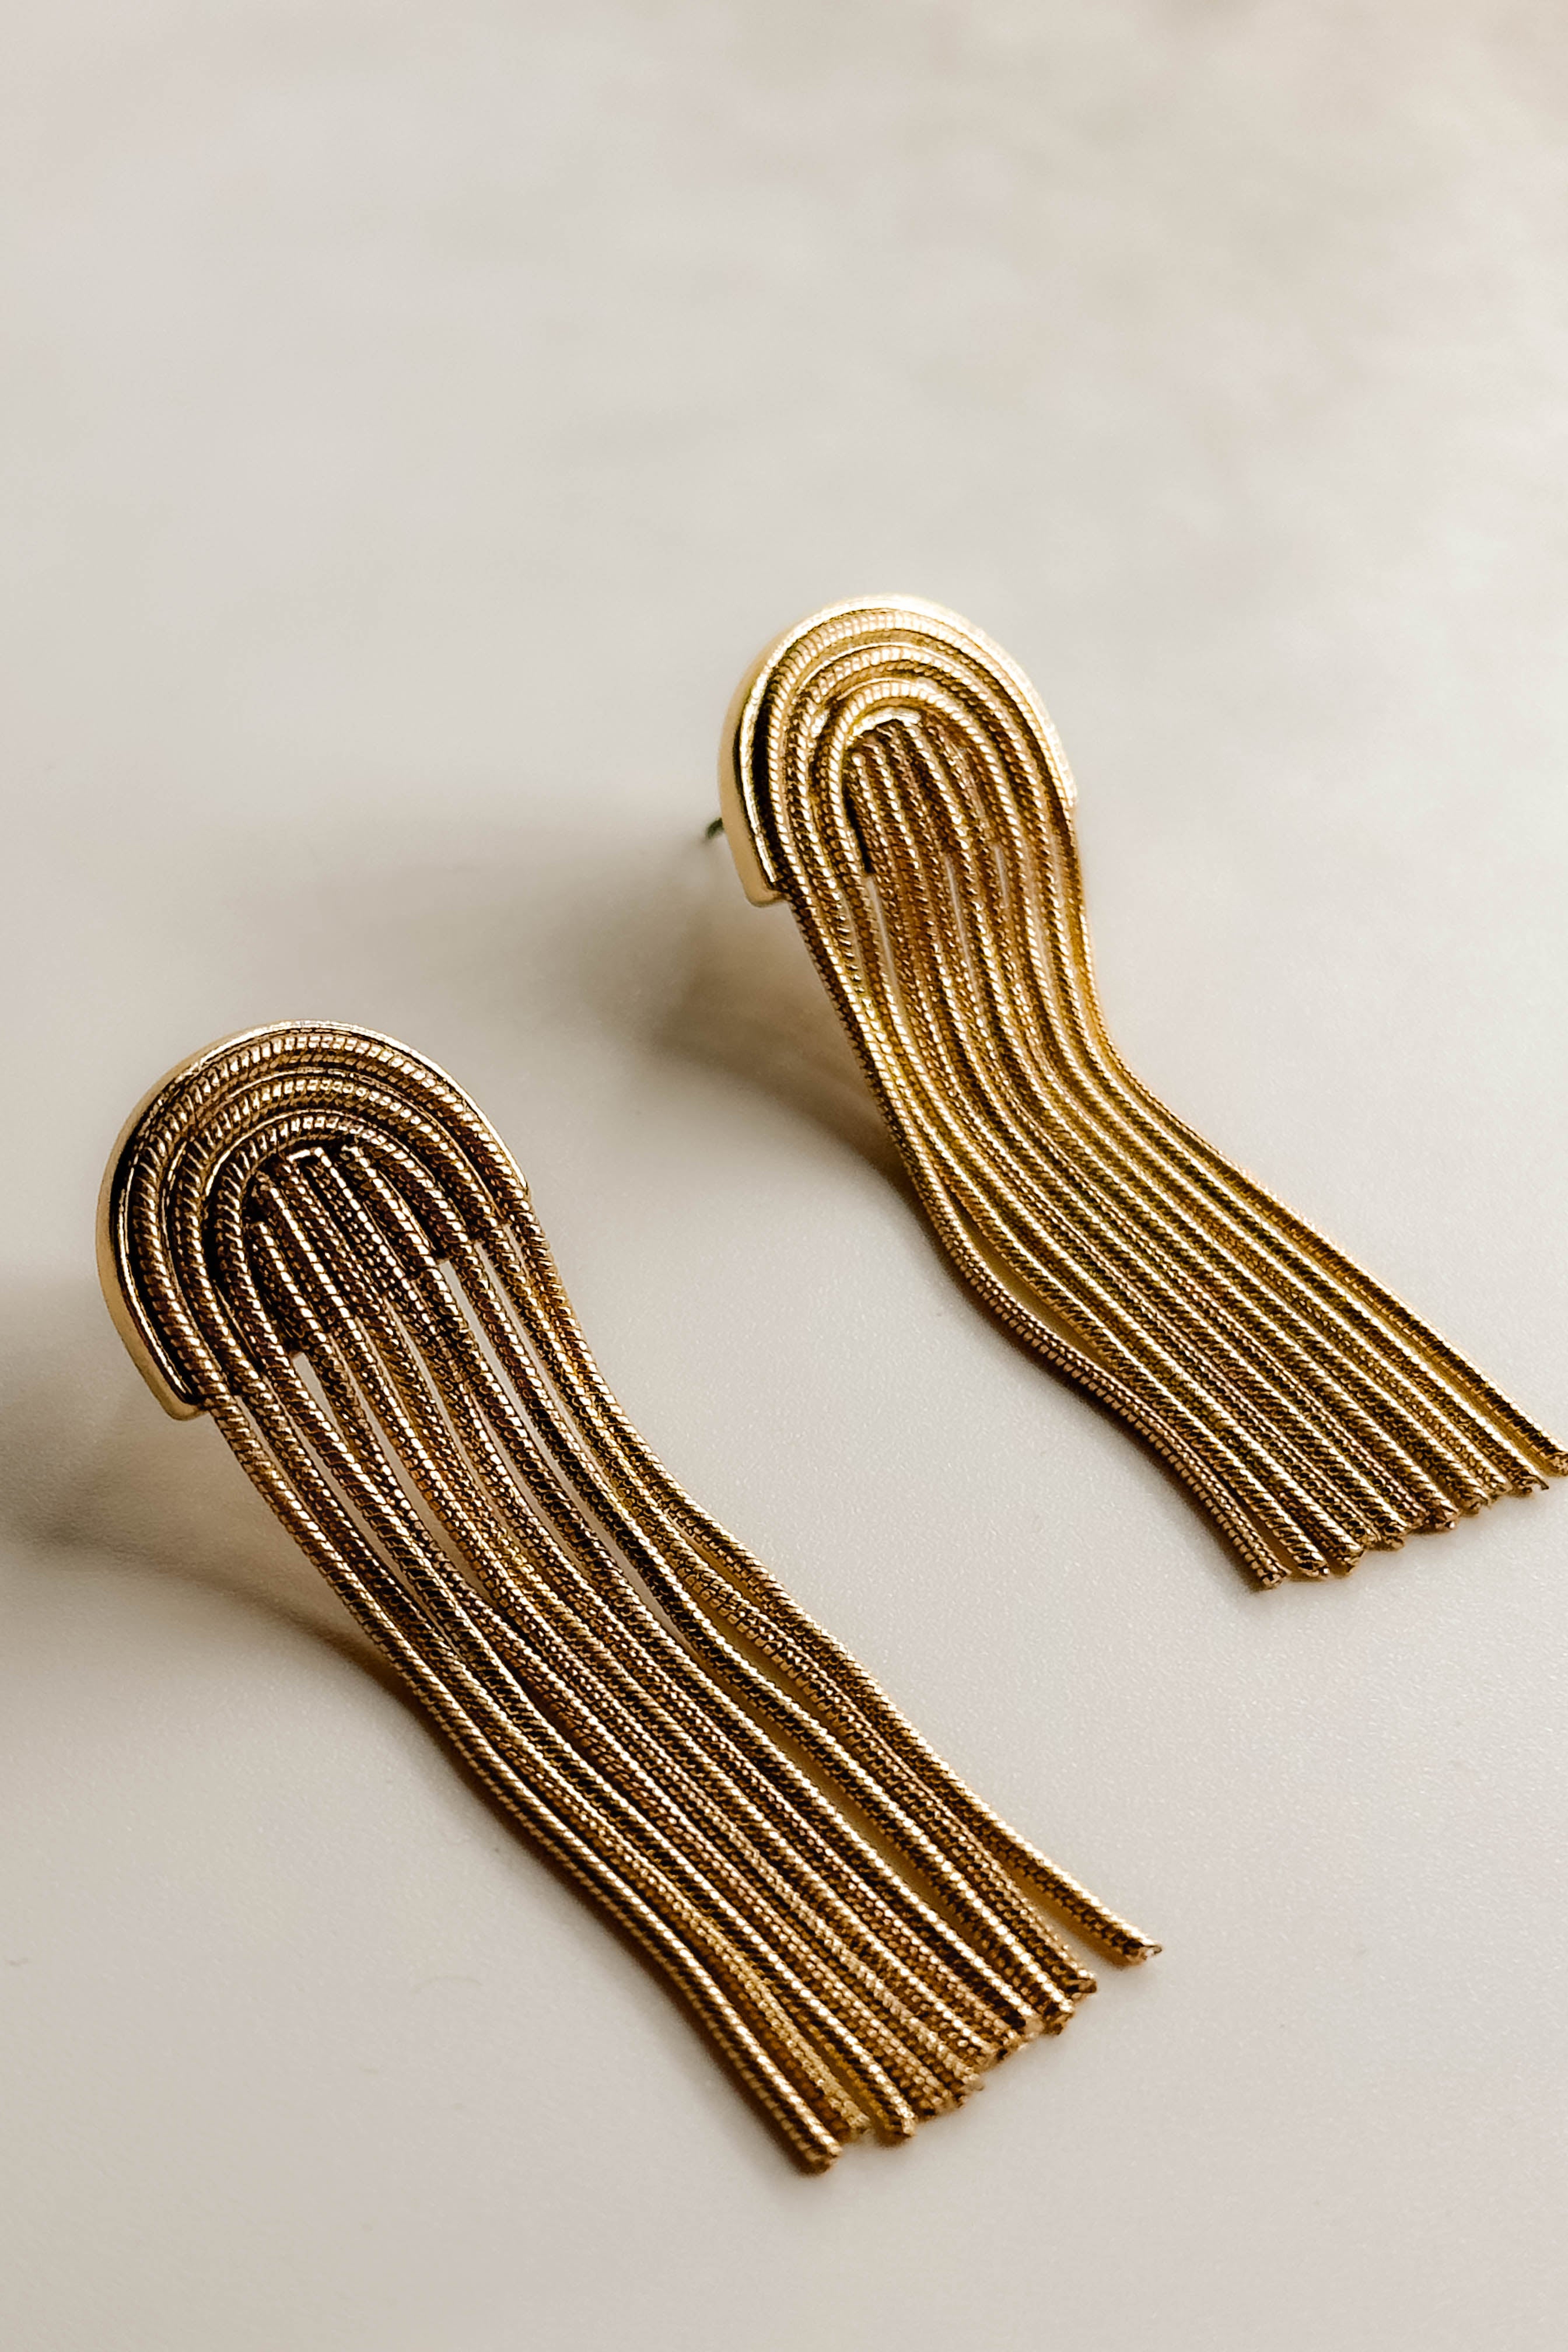 Top view of the Celine Gold Arch Fringe Earrings that feature gold arches on post backs with gold fringe, shown on white paper.